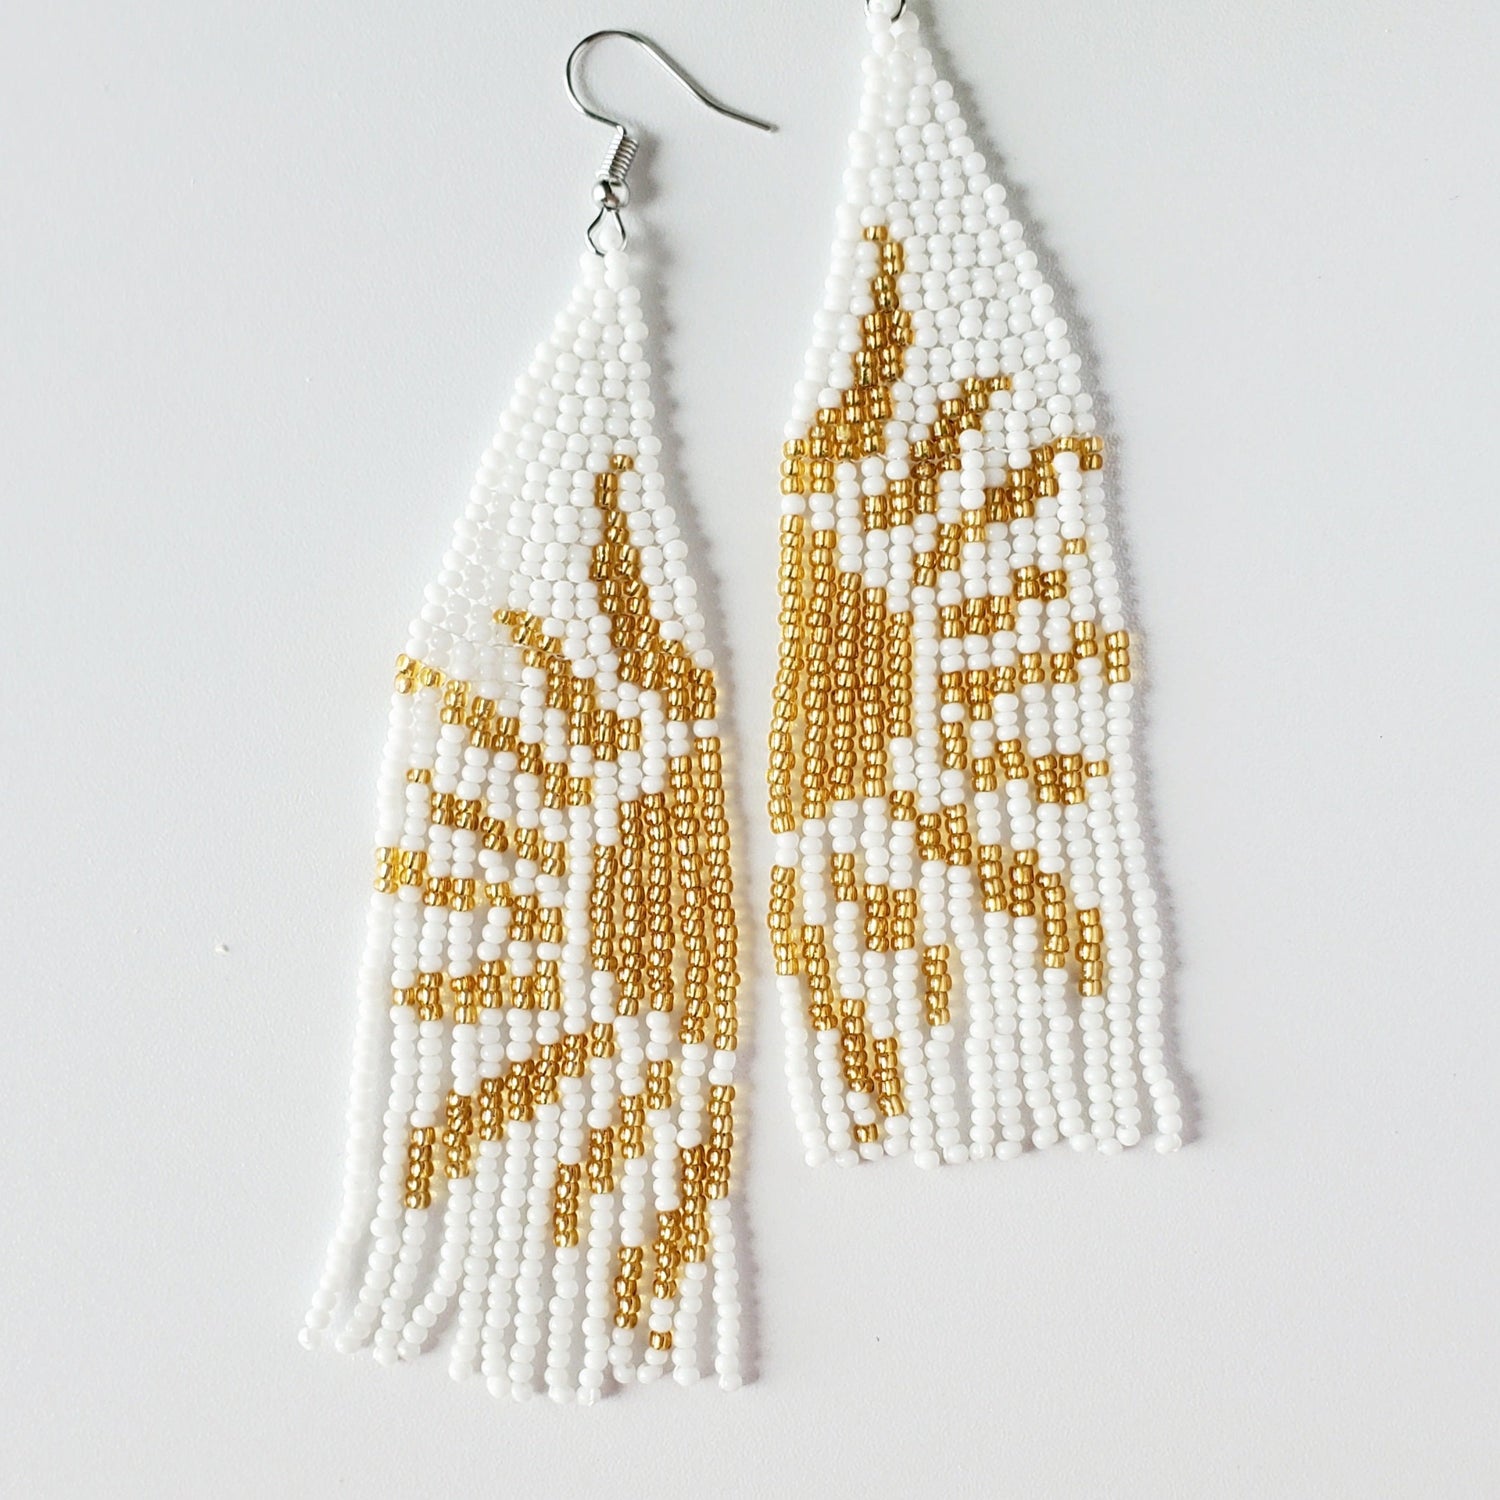 4.75" white seed beaded earrings with half a gold sun woven into each earring with a silver hook, laying on a white background